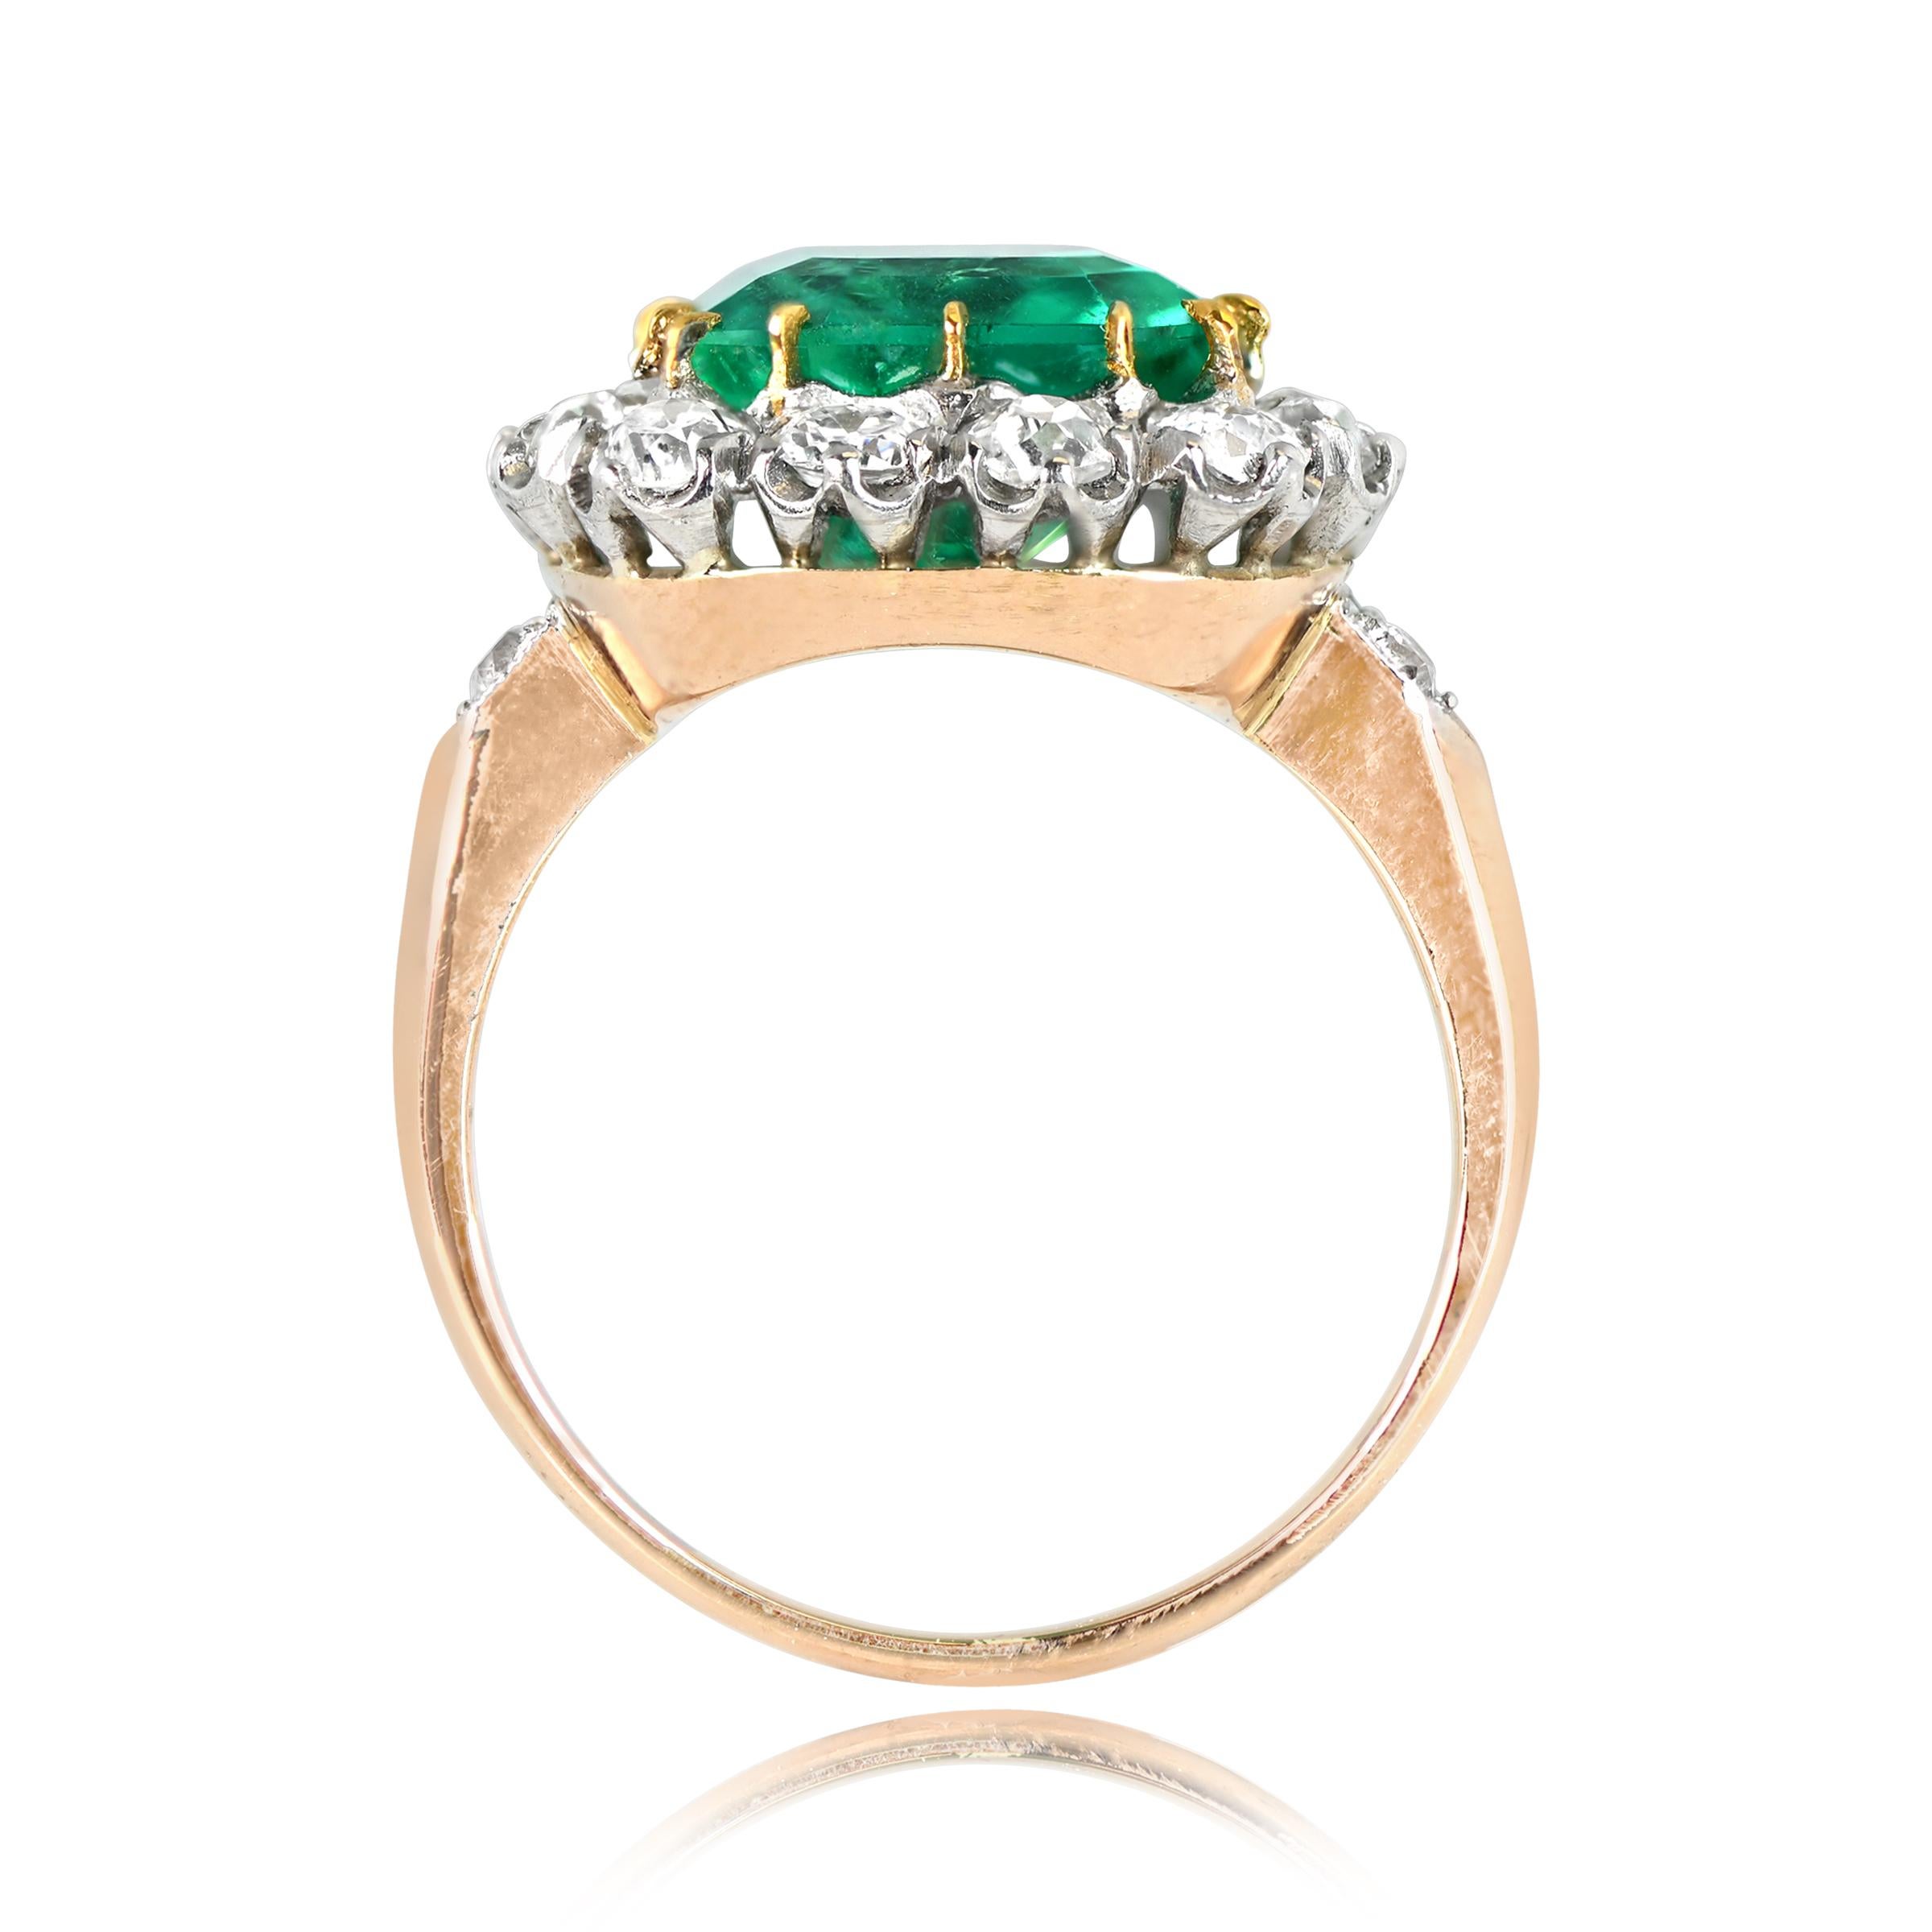 Emerald Cut 4.55ct GIA Colombian Emerald Cluster Ring, in Platinum and 18k Yellow Gold For Sale